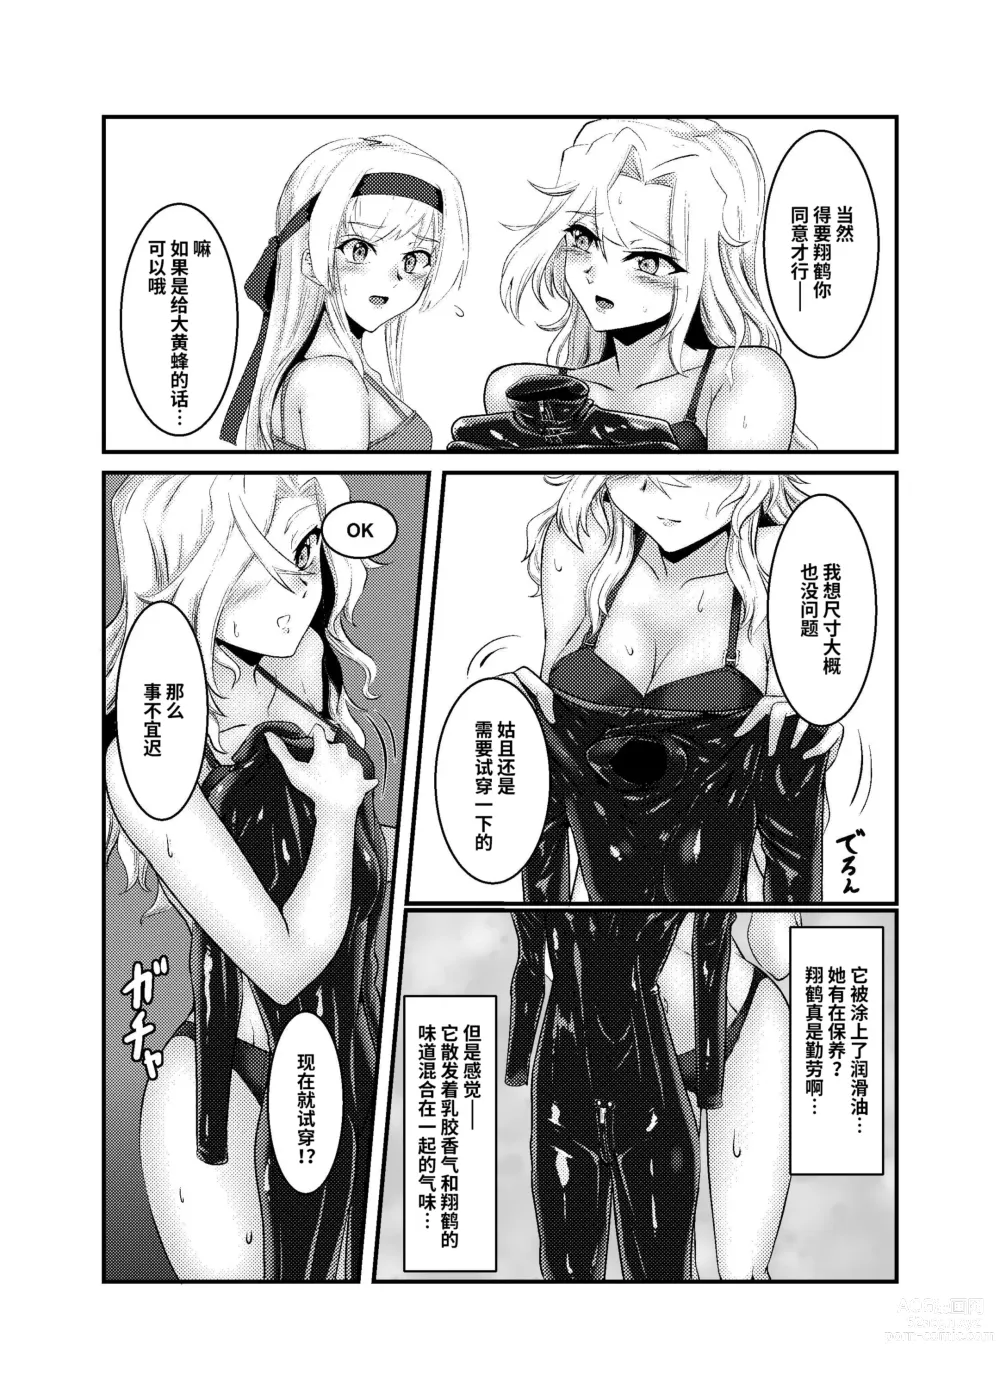 Page 7 of doujinshi Covered by Honey...